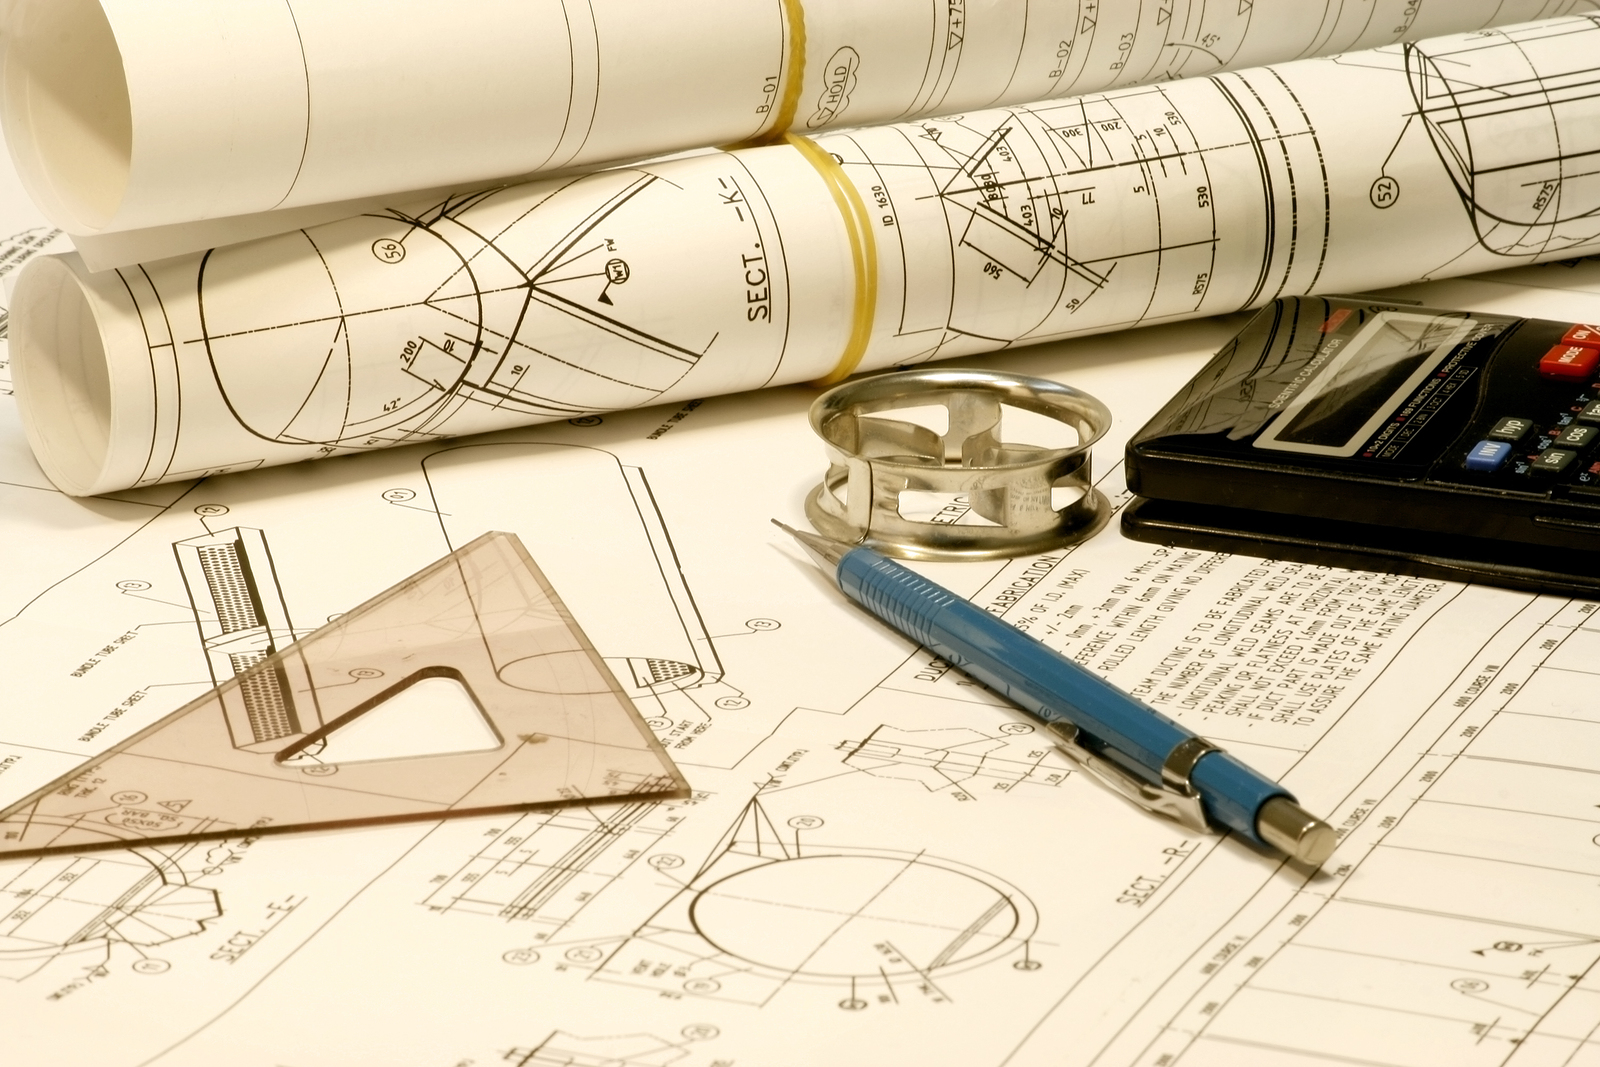 civil engineering wallpaper, drawing, technical drawing, sketch, stationery, material property, pen, writing implement, paper, diagram, fountain pen